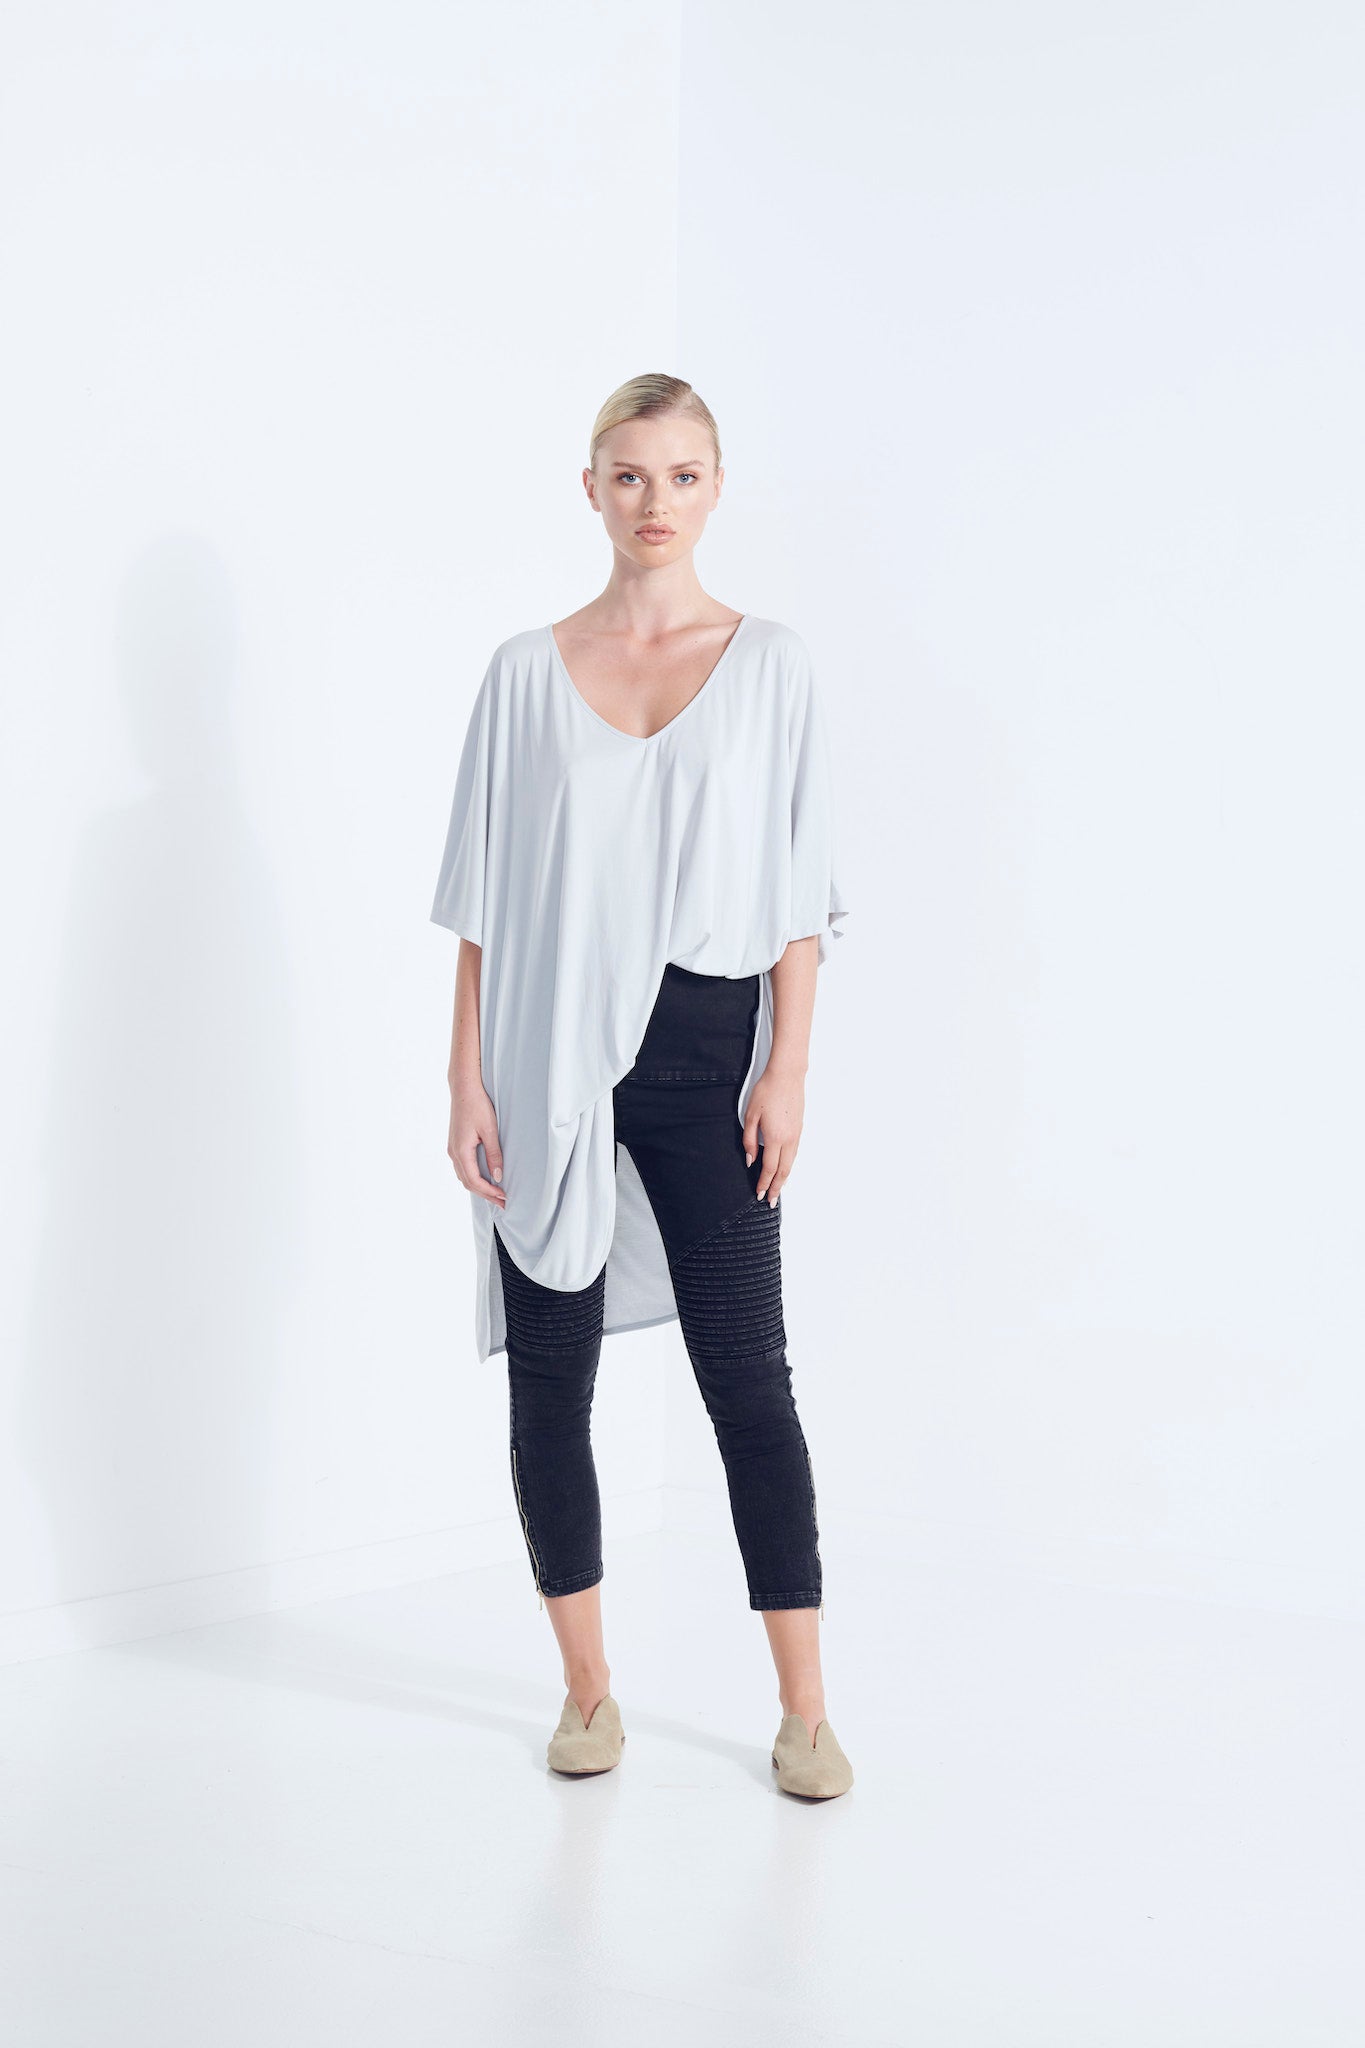 THEMIS DRESS LONGLINE T-SHIRT BEECHWOOD MODAL STRETCH WITH REMOVABLE TIE WISP PALE WASHED GREY  FRONT TEE VIEW 